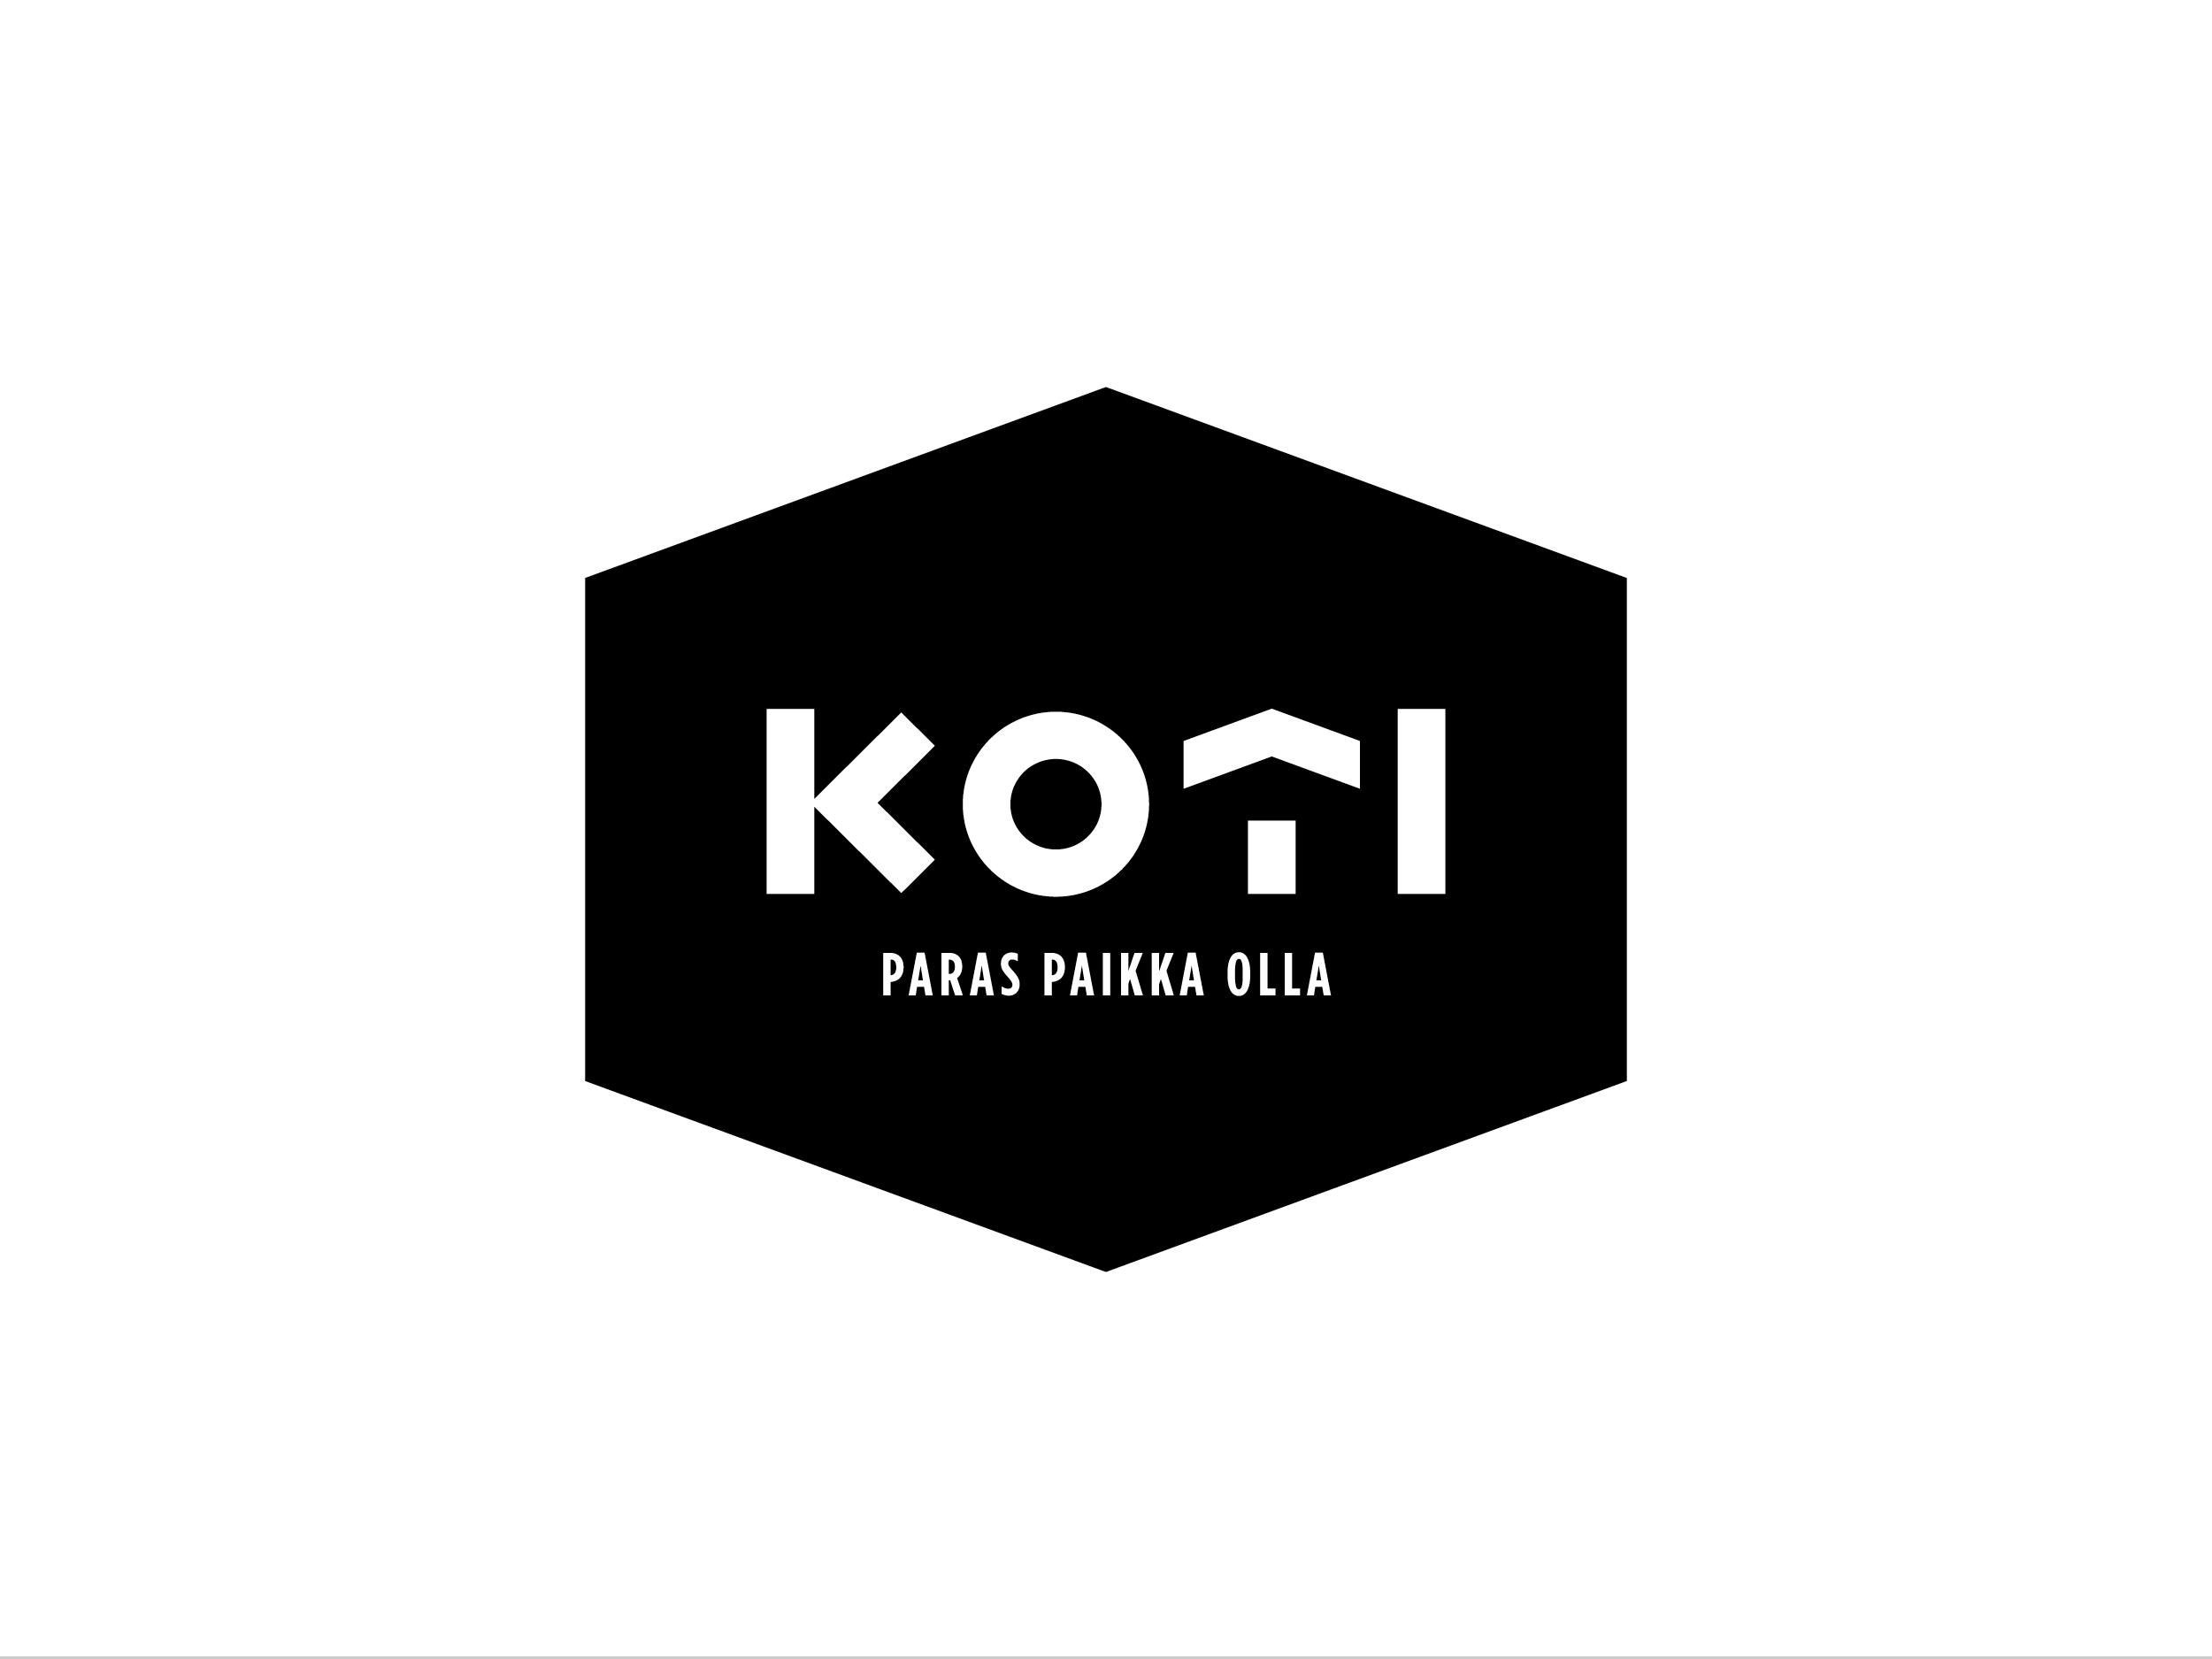  KOTI, campaign for Hobby Hall 